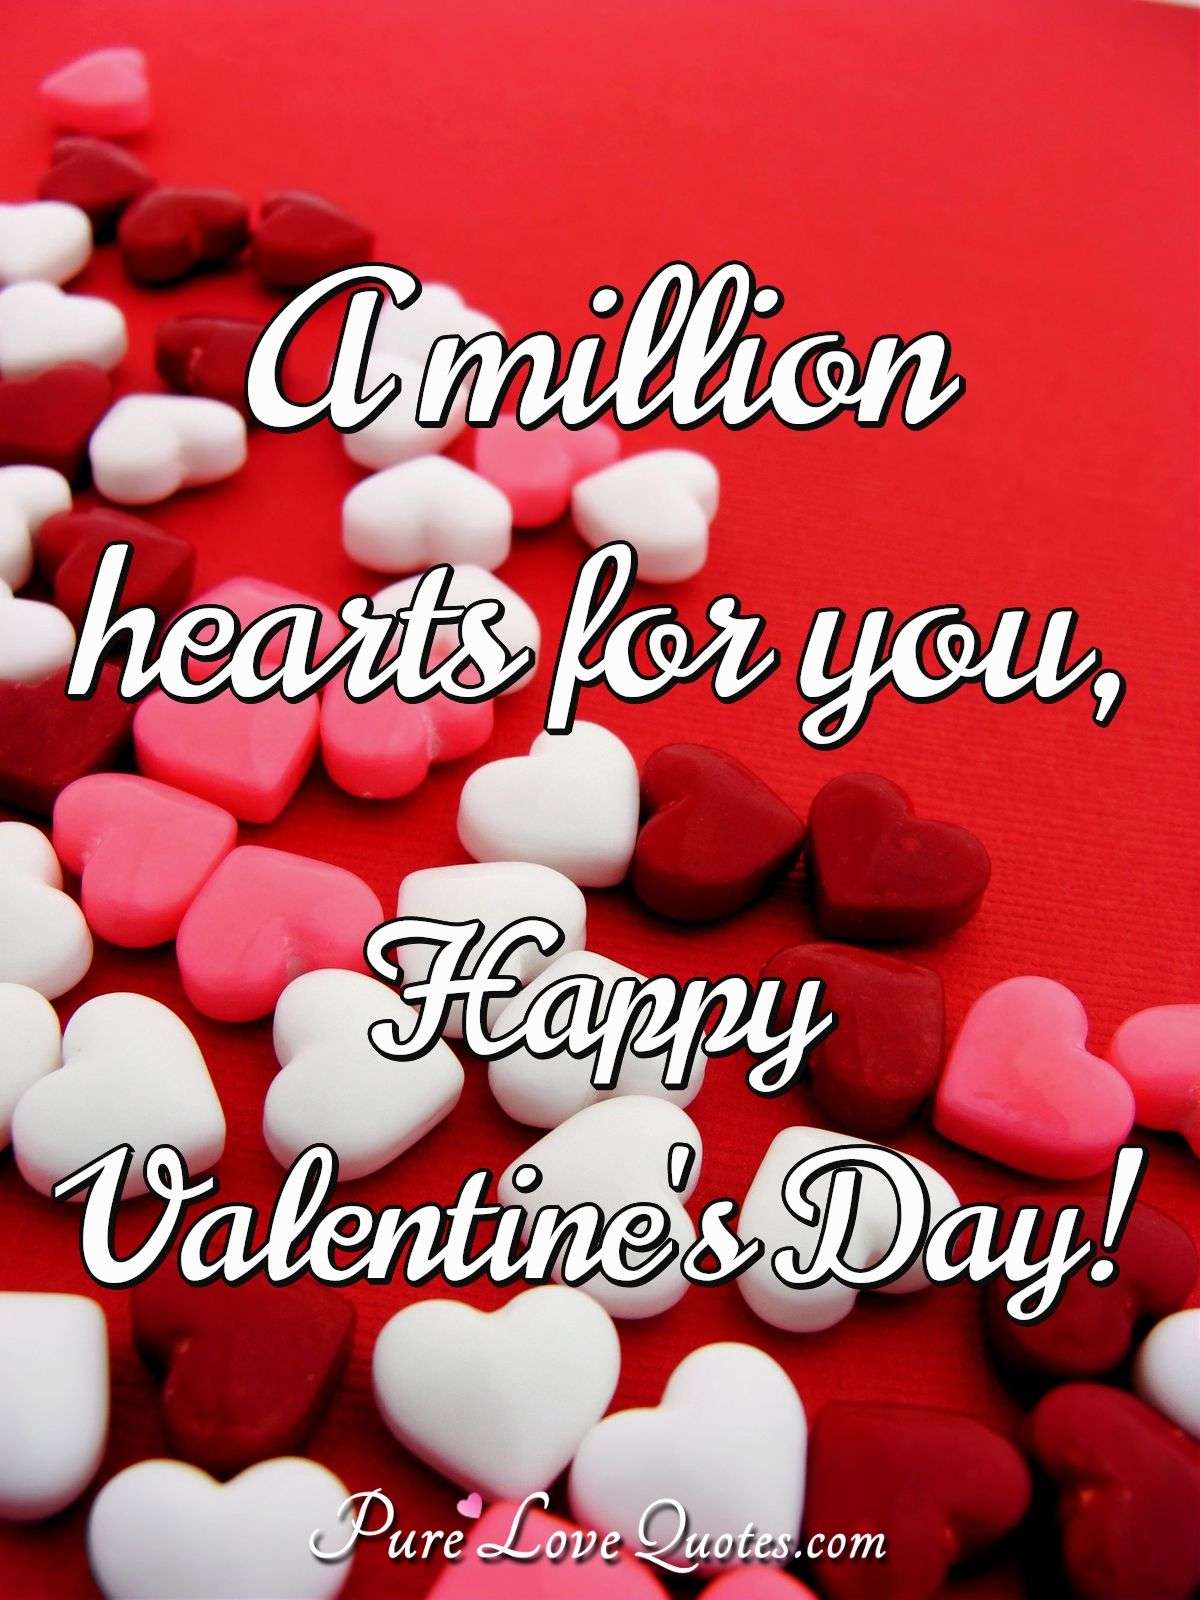 A million hearts for you, Happy Valentine's Day! - Anonymous